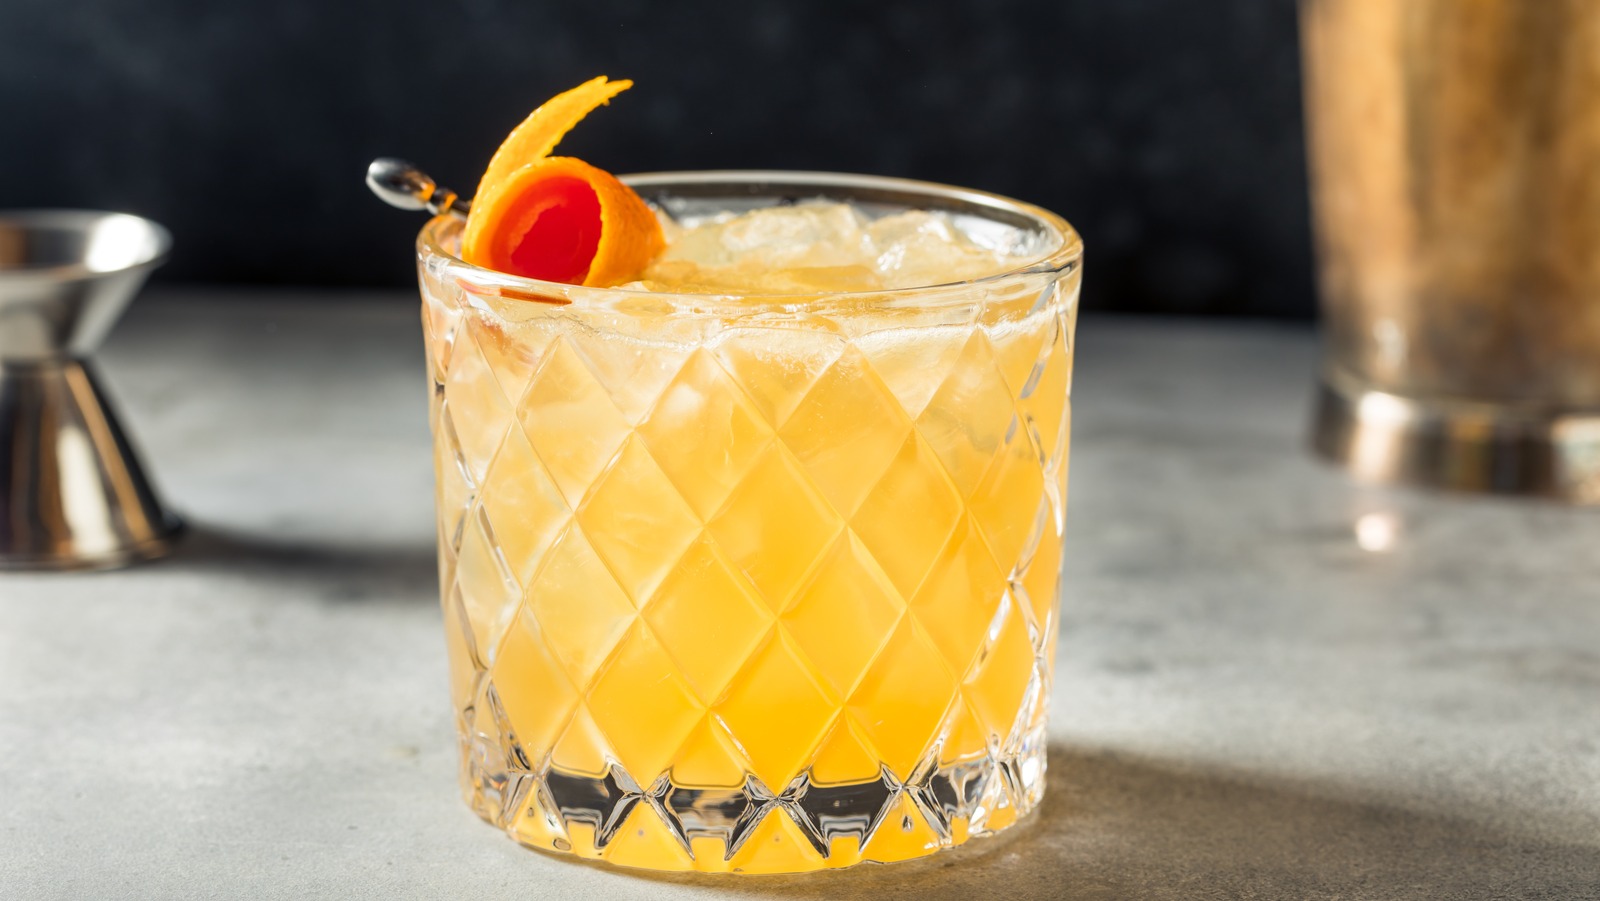 The tastiest Whiskey Sour is one step closer